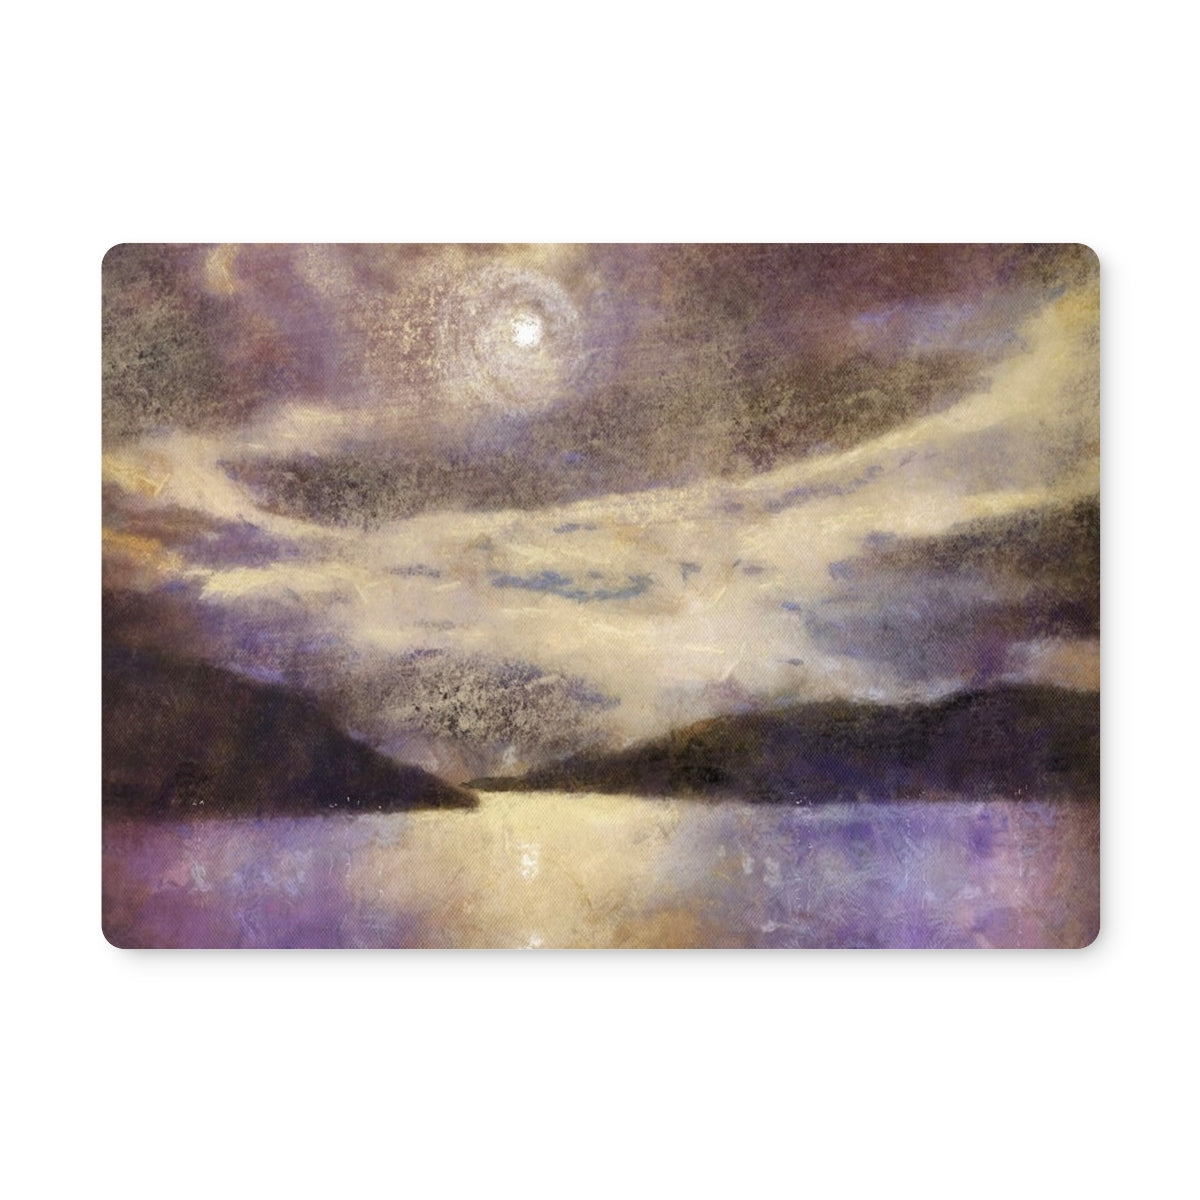 Moonlight Meets Lewis & Harris Art Gifts Placemat-Placemats-Hebridean Islands Art Gallery-2 Placemats-Paintings, Prints, Homeware, Art Gifts From Scotland By Scottish Artist Kevin Hunter